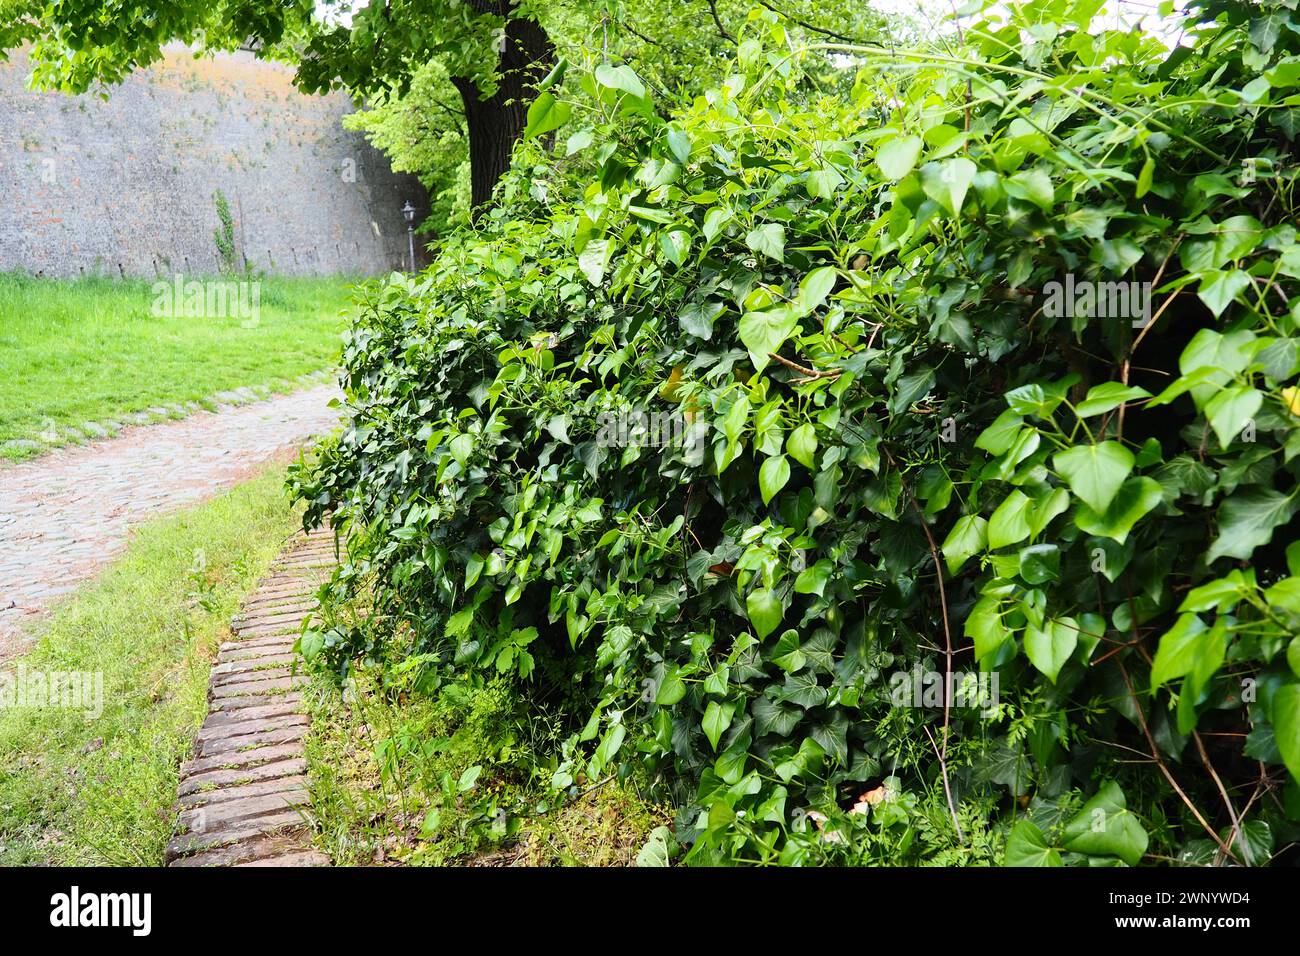 Leaves and young shoots of ivy climb up the wall. European forest. Creeping parasitic plant. Green foliage. Triangular Leaf. Common ivy or Hedera Stock Photo